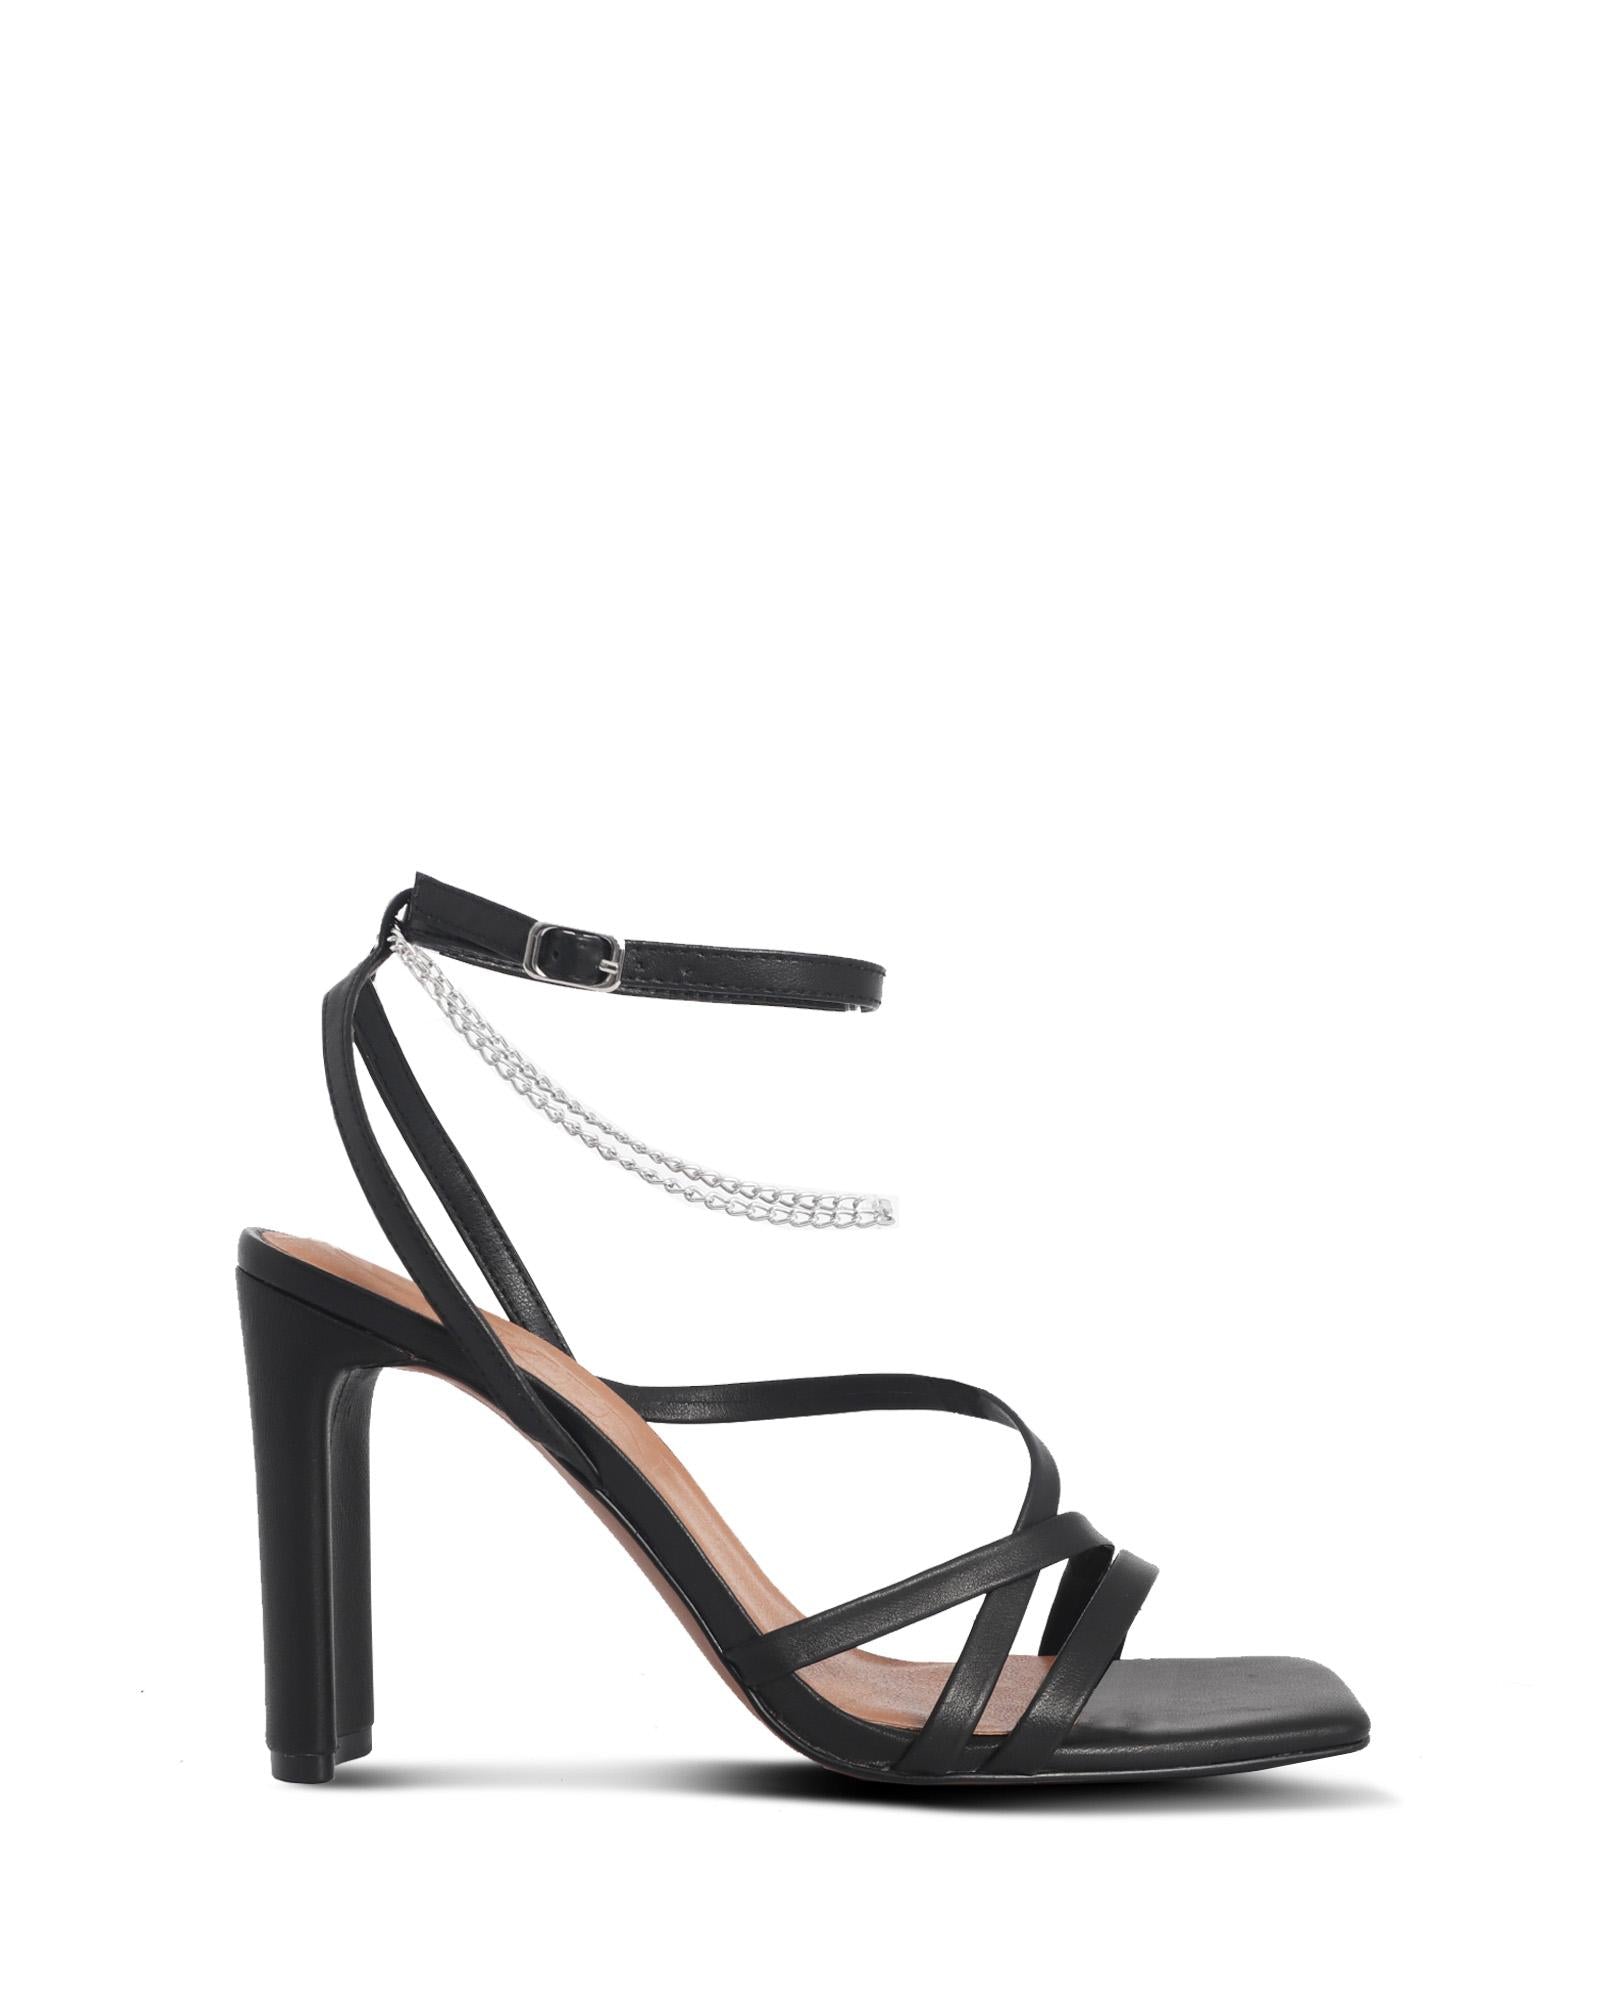 Belize Black 9cm Structure Heel with Thin Adjustable Ankle Straps and Chain Detail 